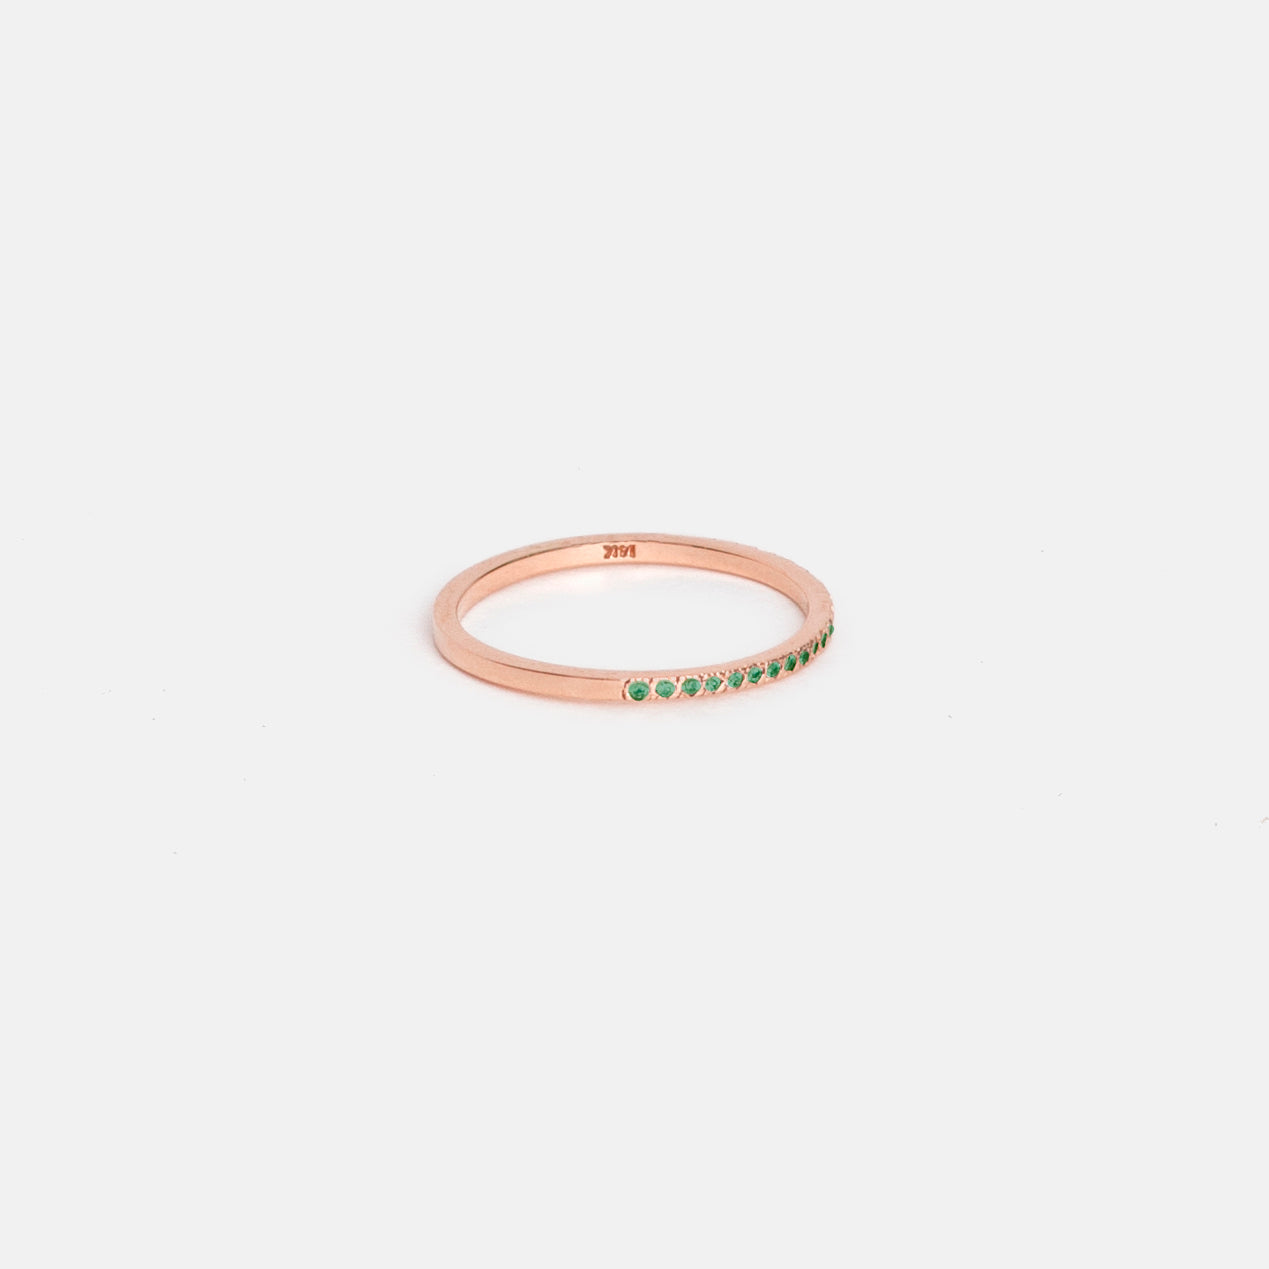 Eile Alternative Ring in 14k Rose Gold set with Emeralds By SHW Fine Jewelry NYC